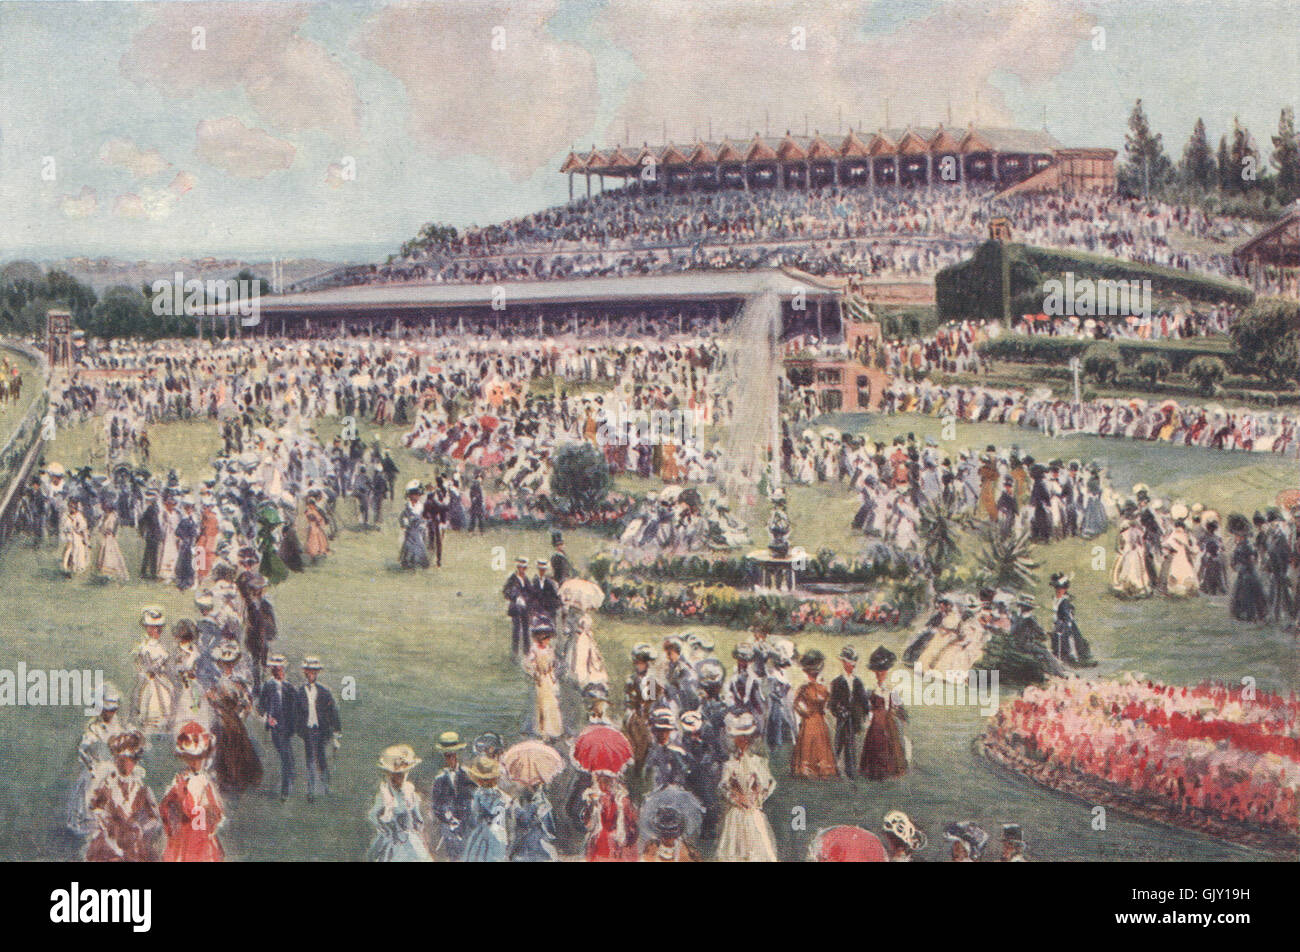 Flemington Race-Course - Melbourne Cup Day' by Percy Spence. Australia, 1910 Stock Photo